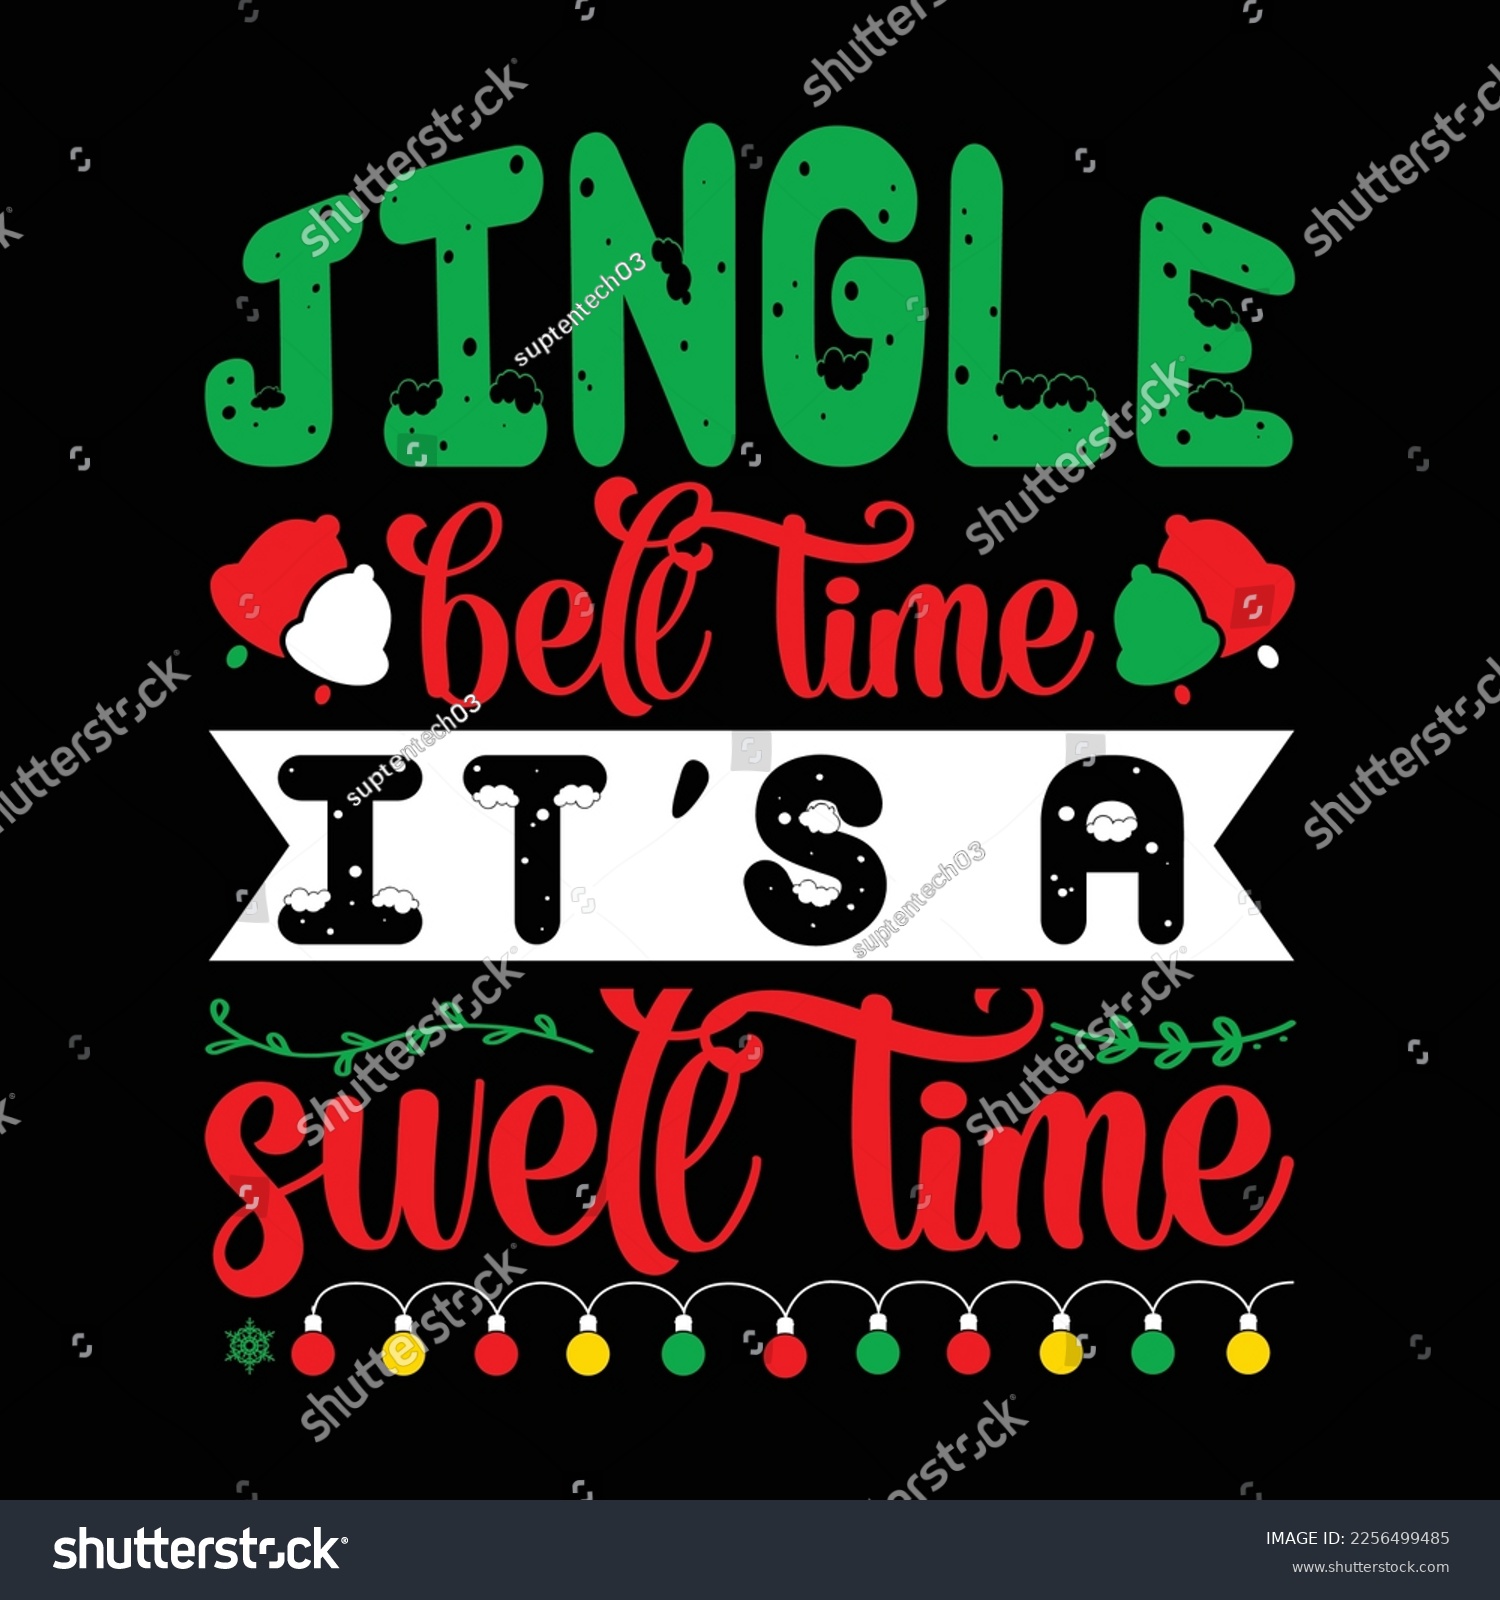 SVG of Jingle Bell Time It's a Swell Time, Merry Christmas shirts Print Template, Xmas Ugly Snow Santa Clouse New Year Holiday Candy Santa Hat vector illustration for Christmas hand lettered  svg